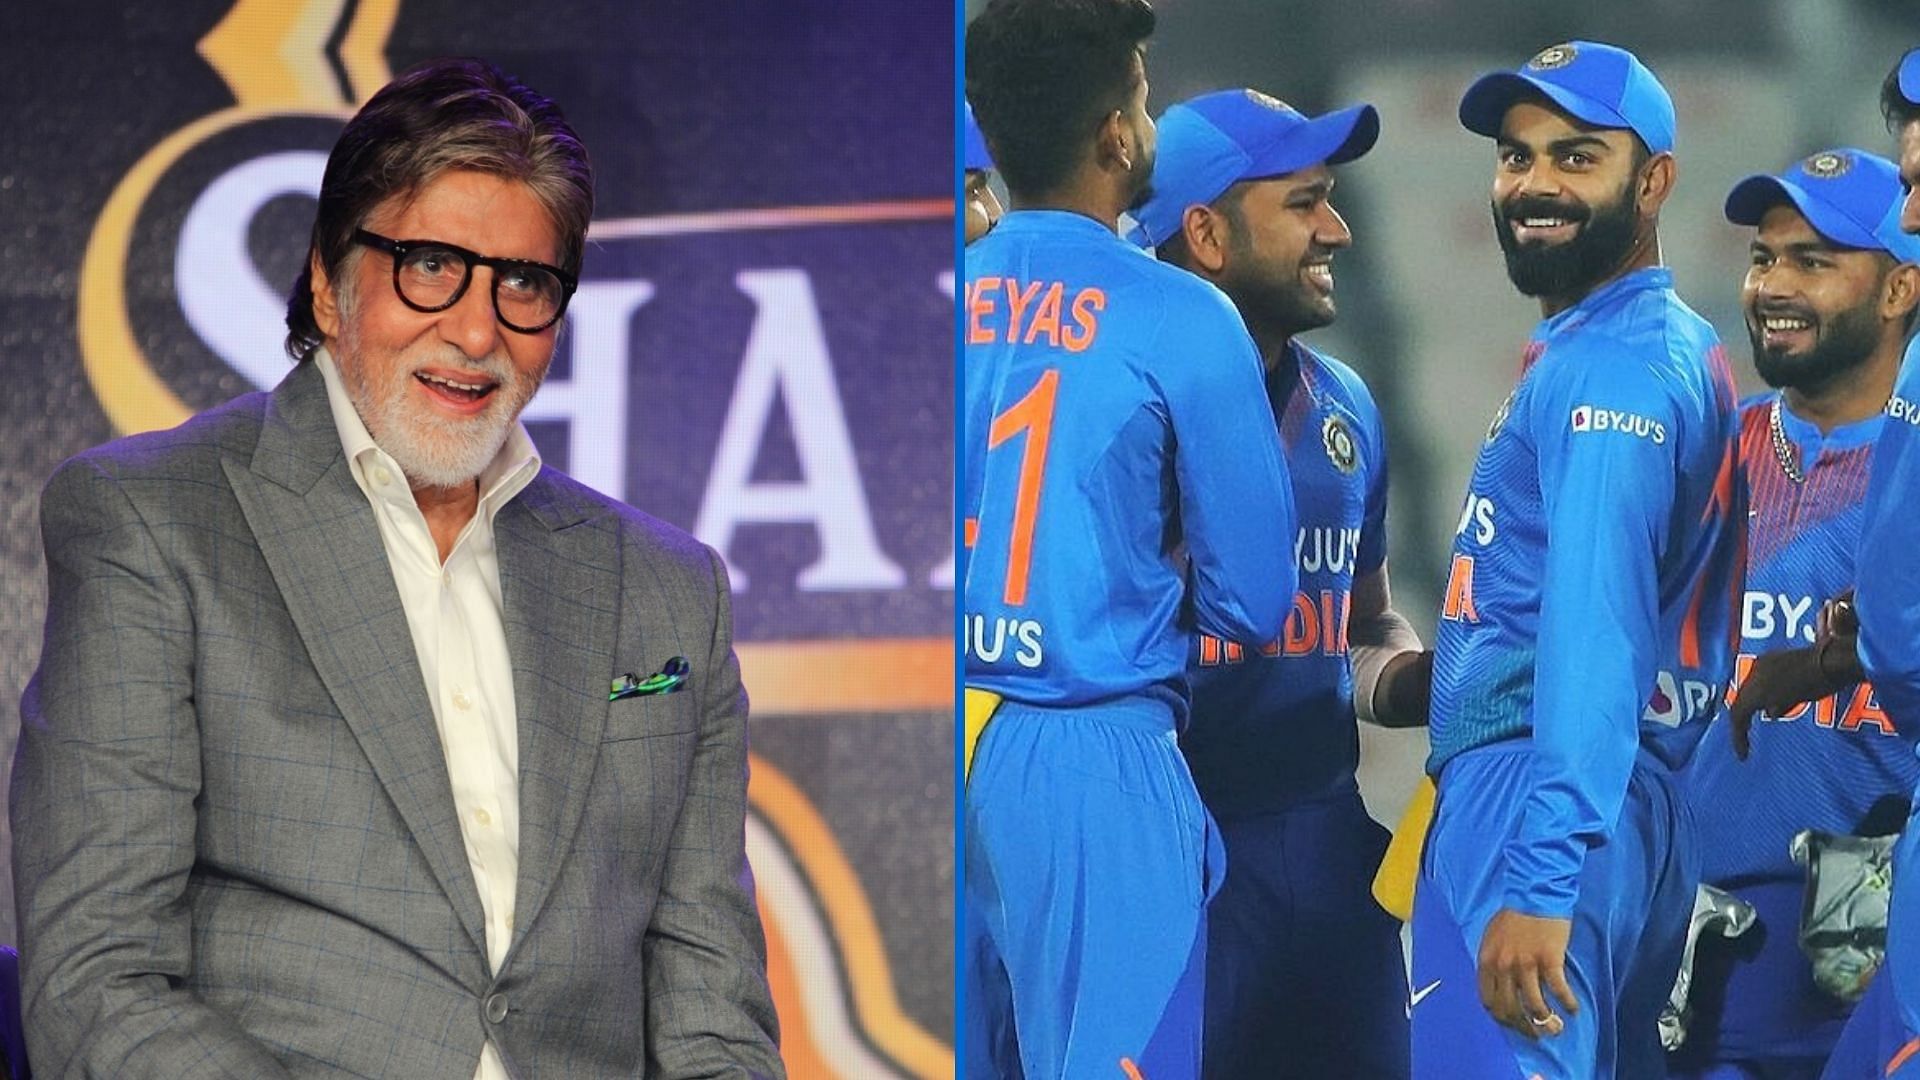 Amitabh Bachchan was thrilled at Virat Kohli’s T20I win against the West Indies.